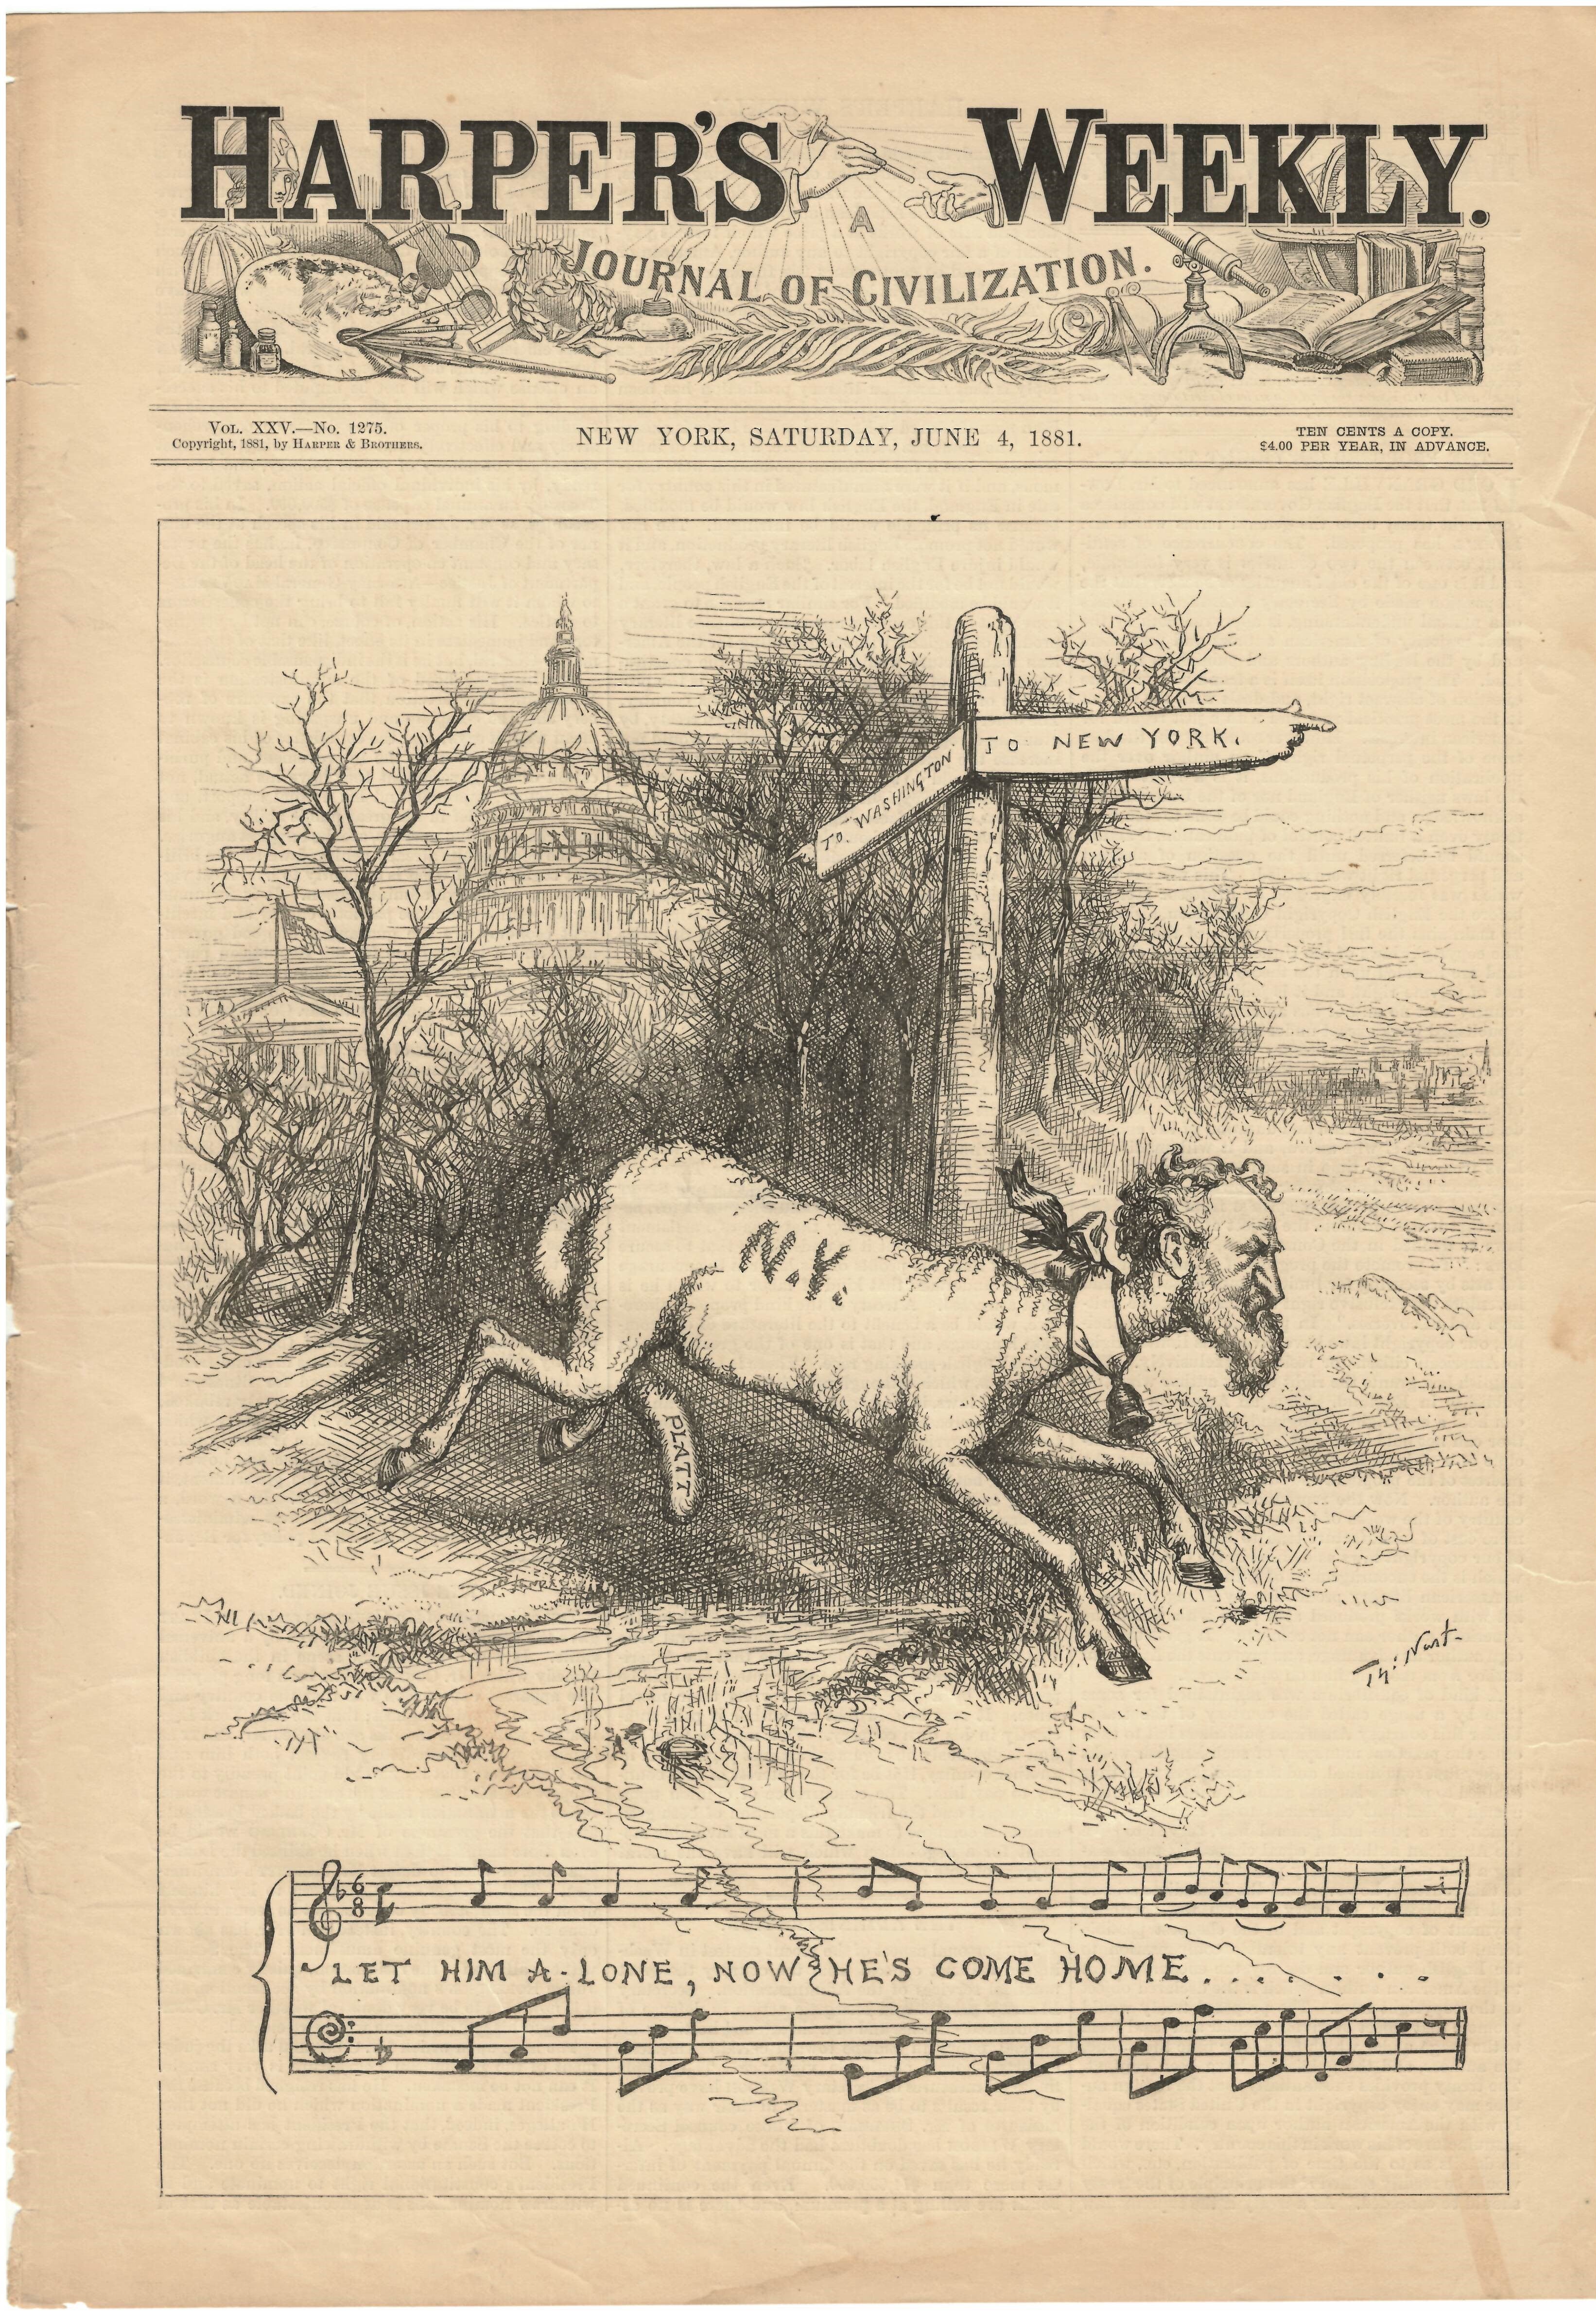 Harper's Weekly June 4, 1881 Let Him A-Lone, Now He's Come Home Cover Page Ad Print